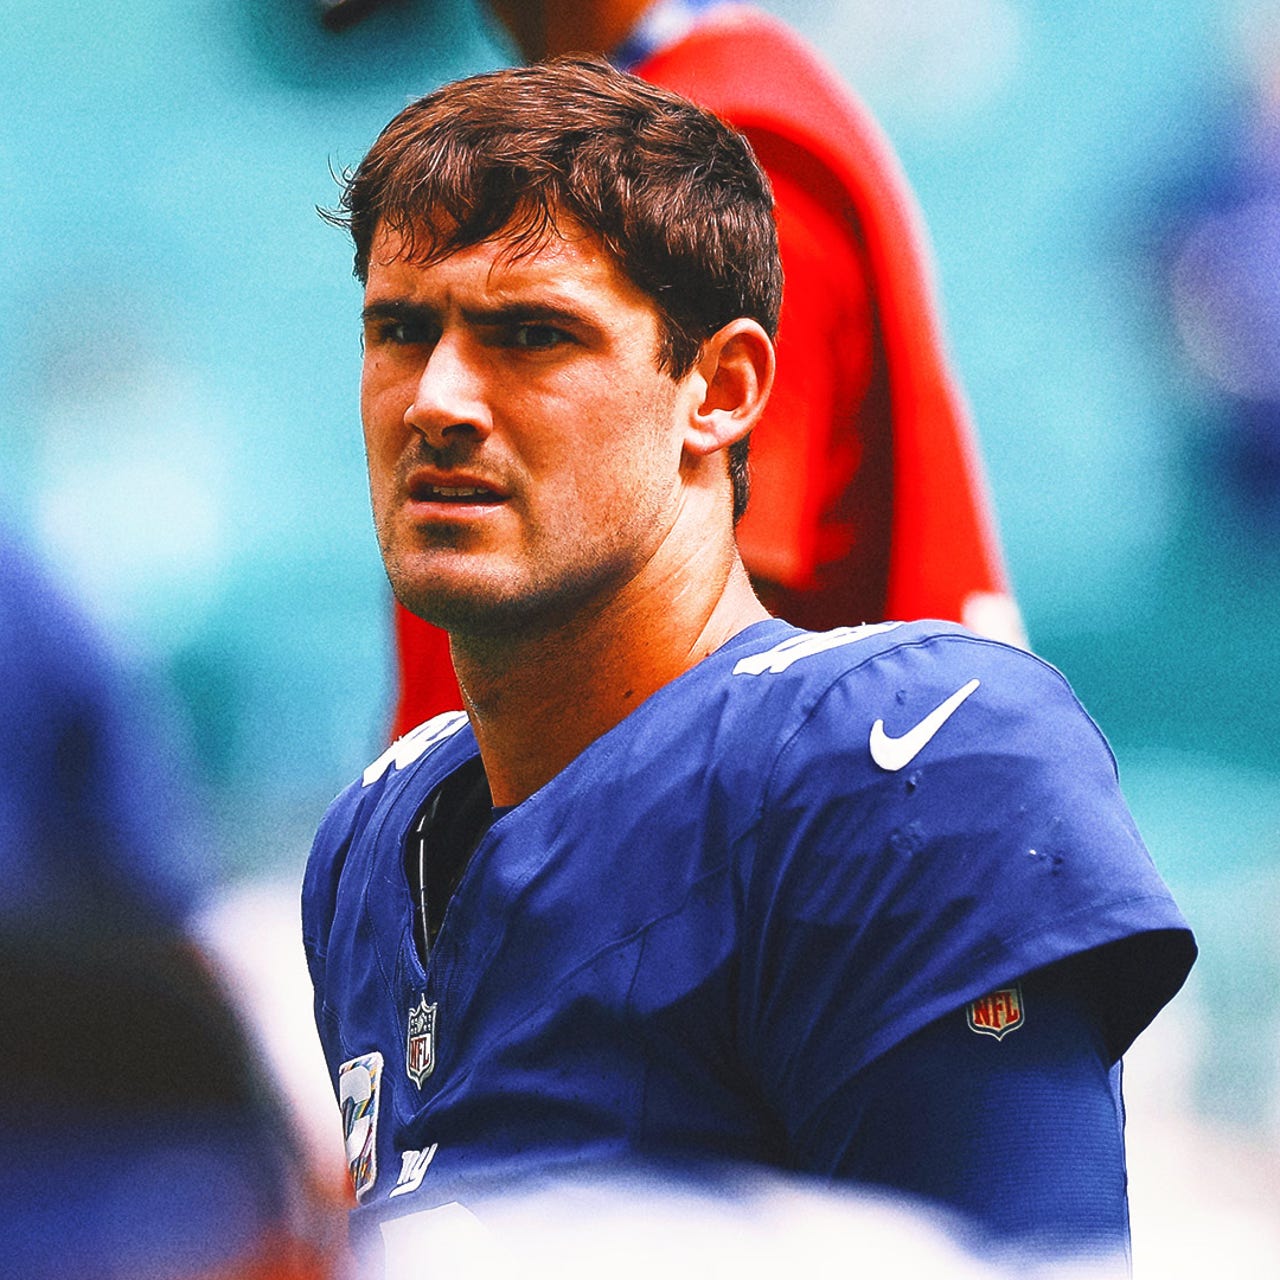 Giants QB Daniel Jones questionable with neck injury against the Commanders